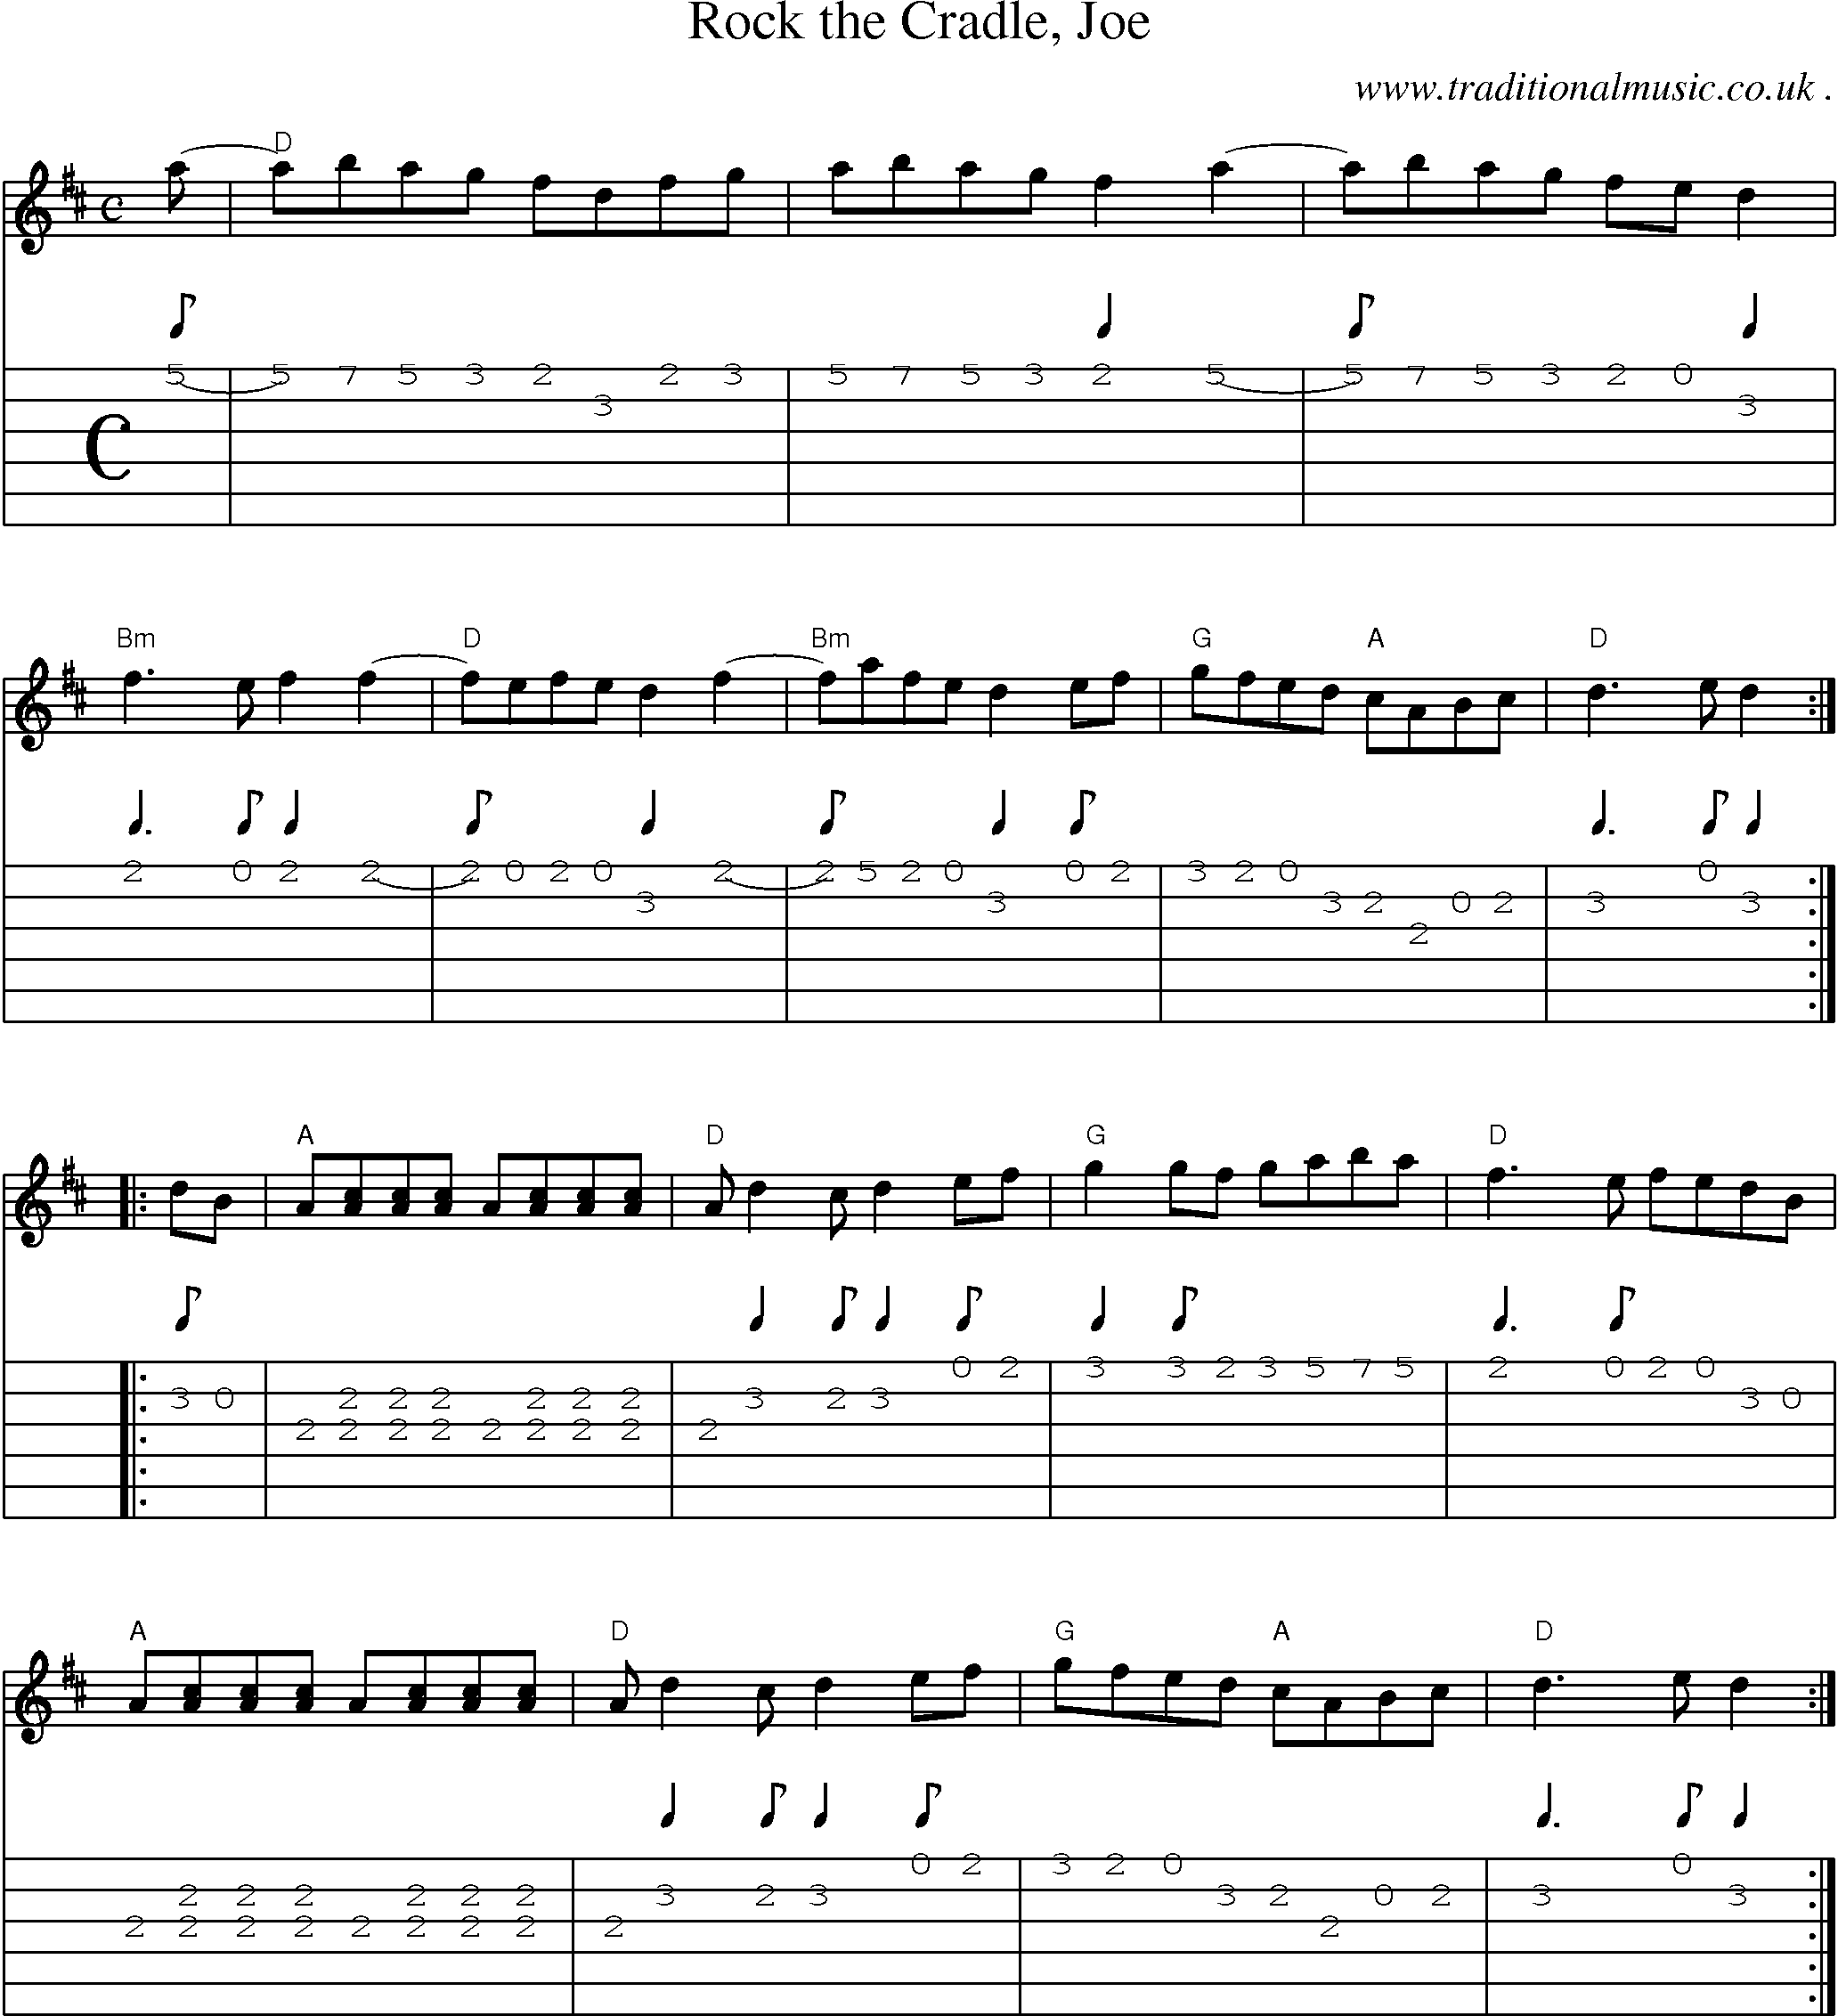 Music Score and Guitar Tabs for Rock The Cradle Joe1